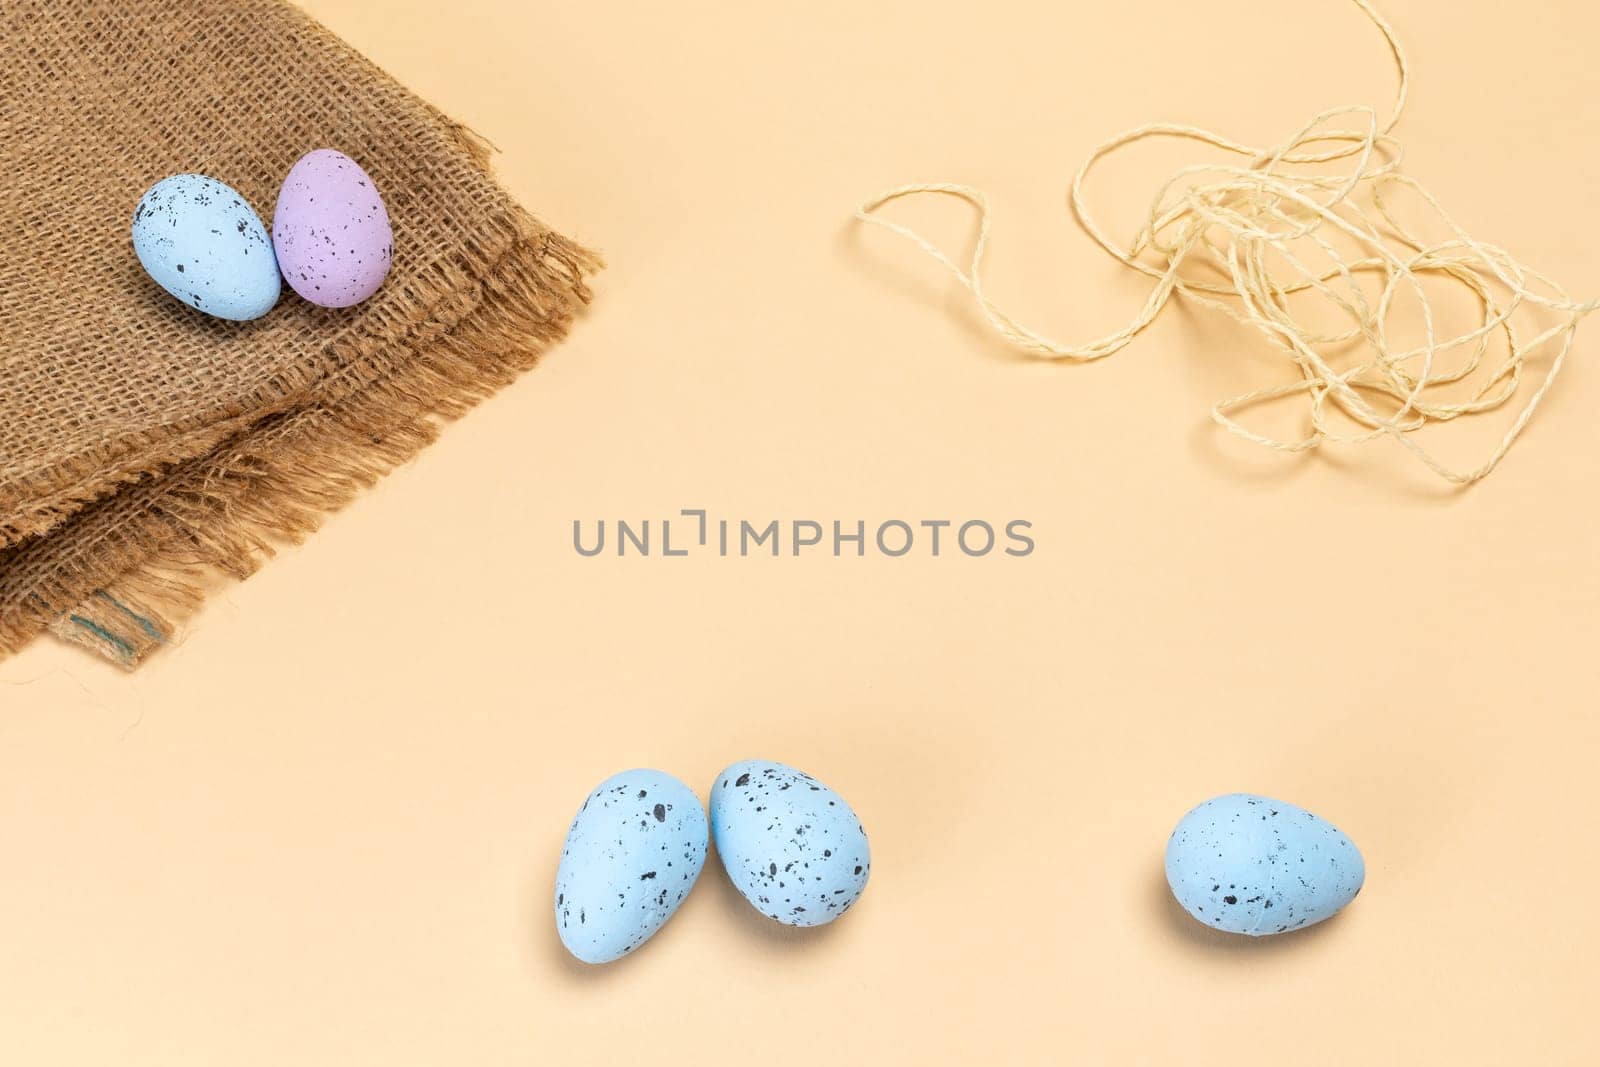 Easter eggs on a sackcloth bag on the beige background. by mvg6894